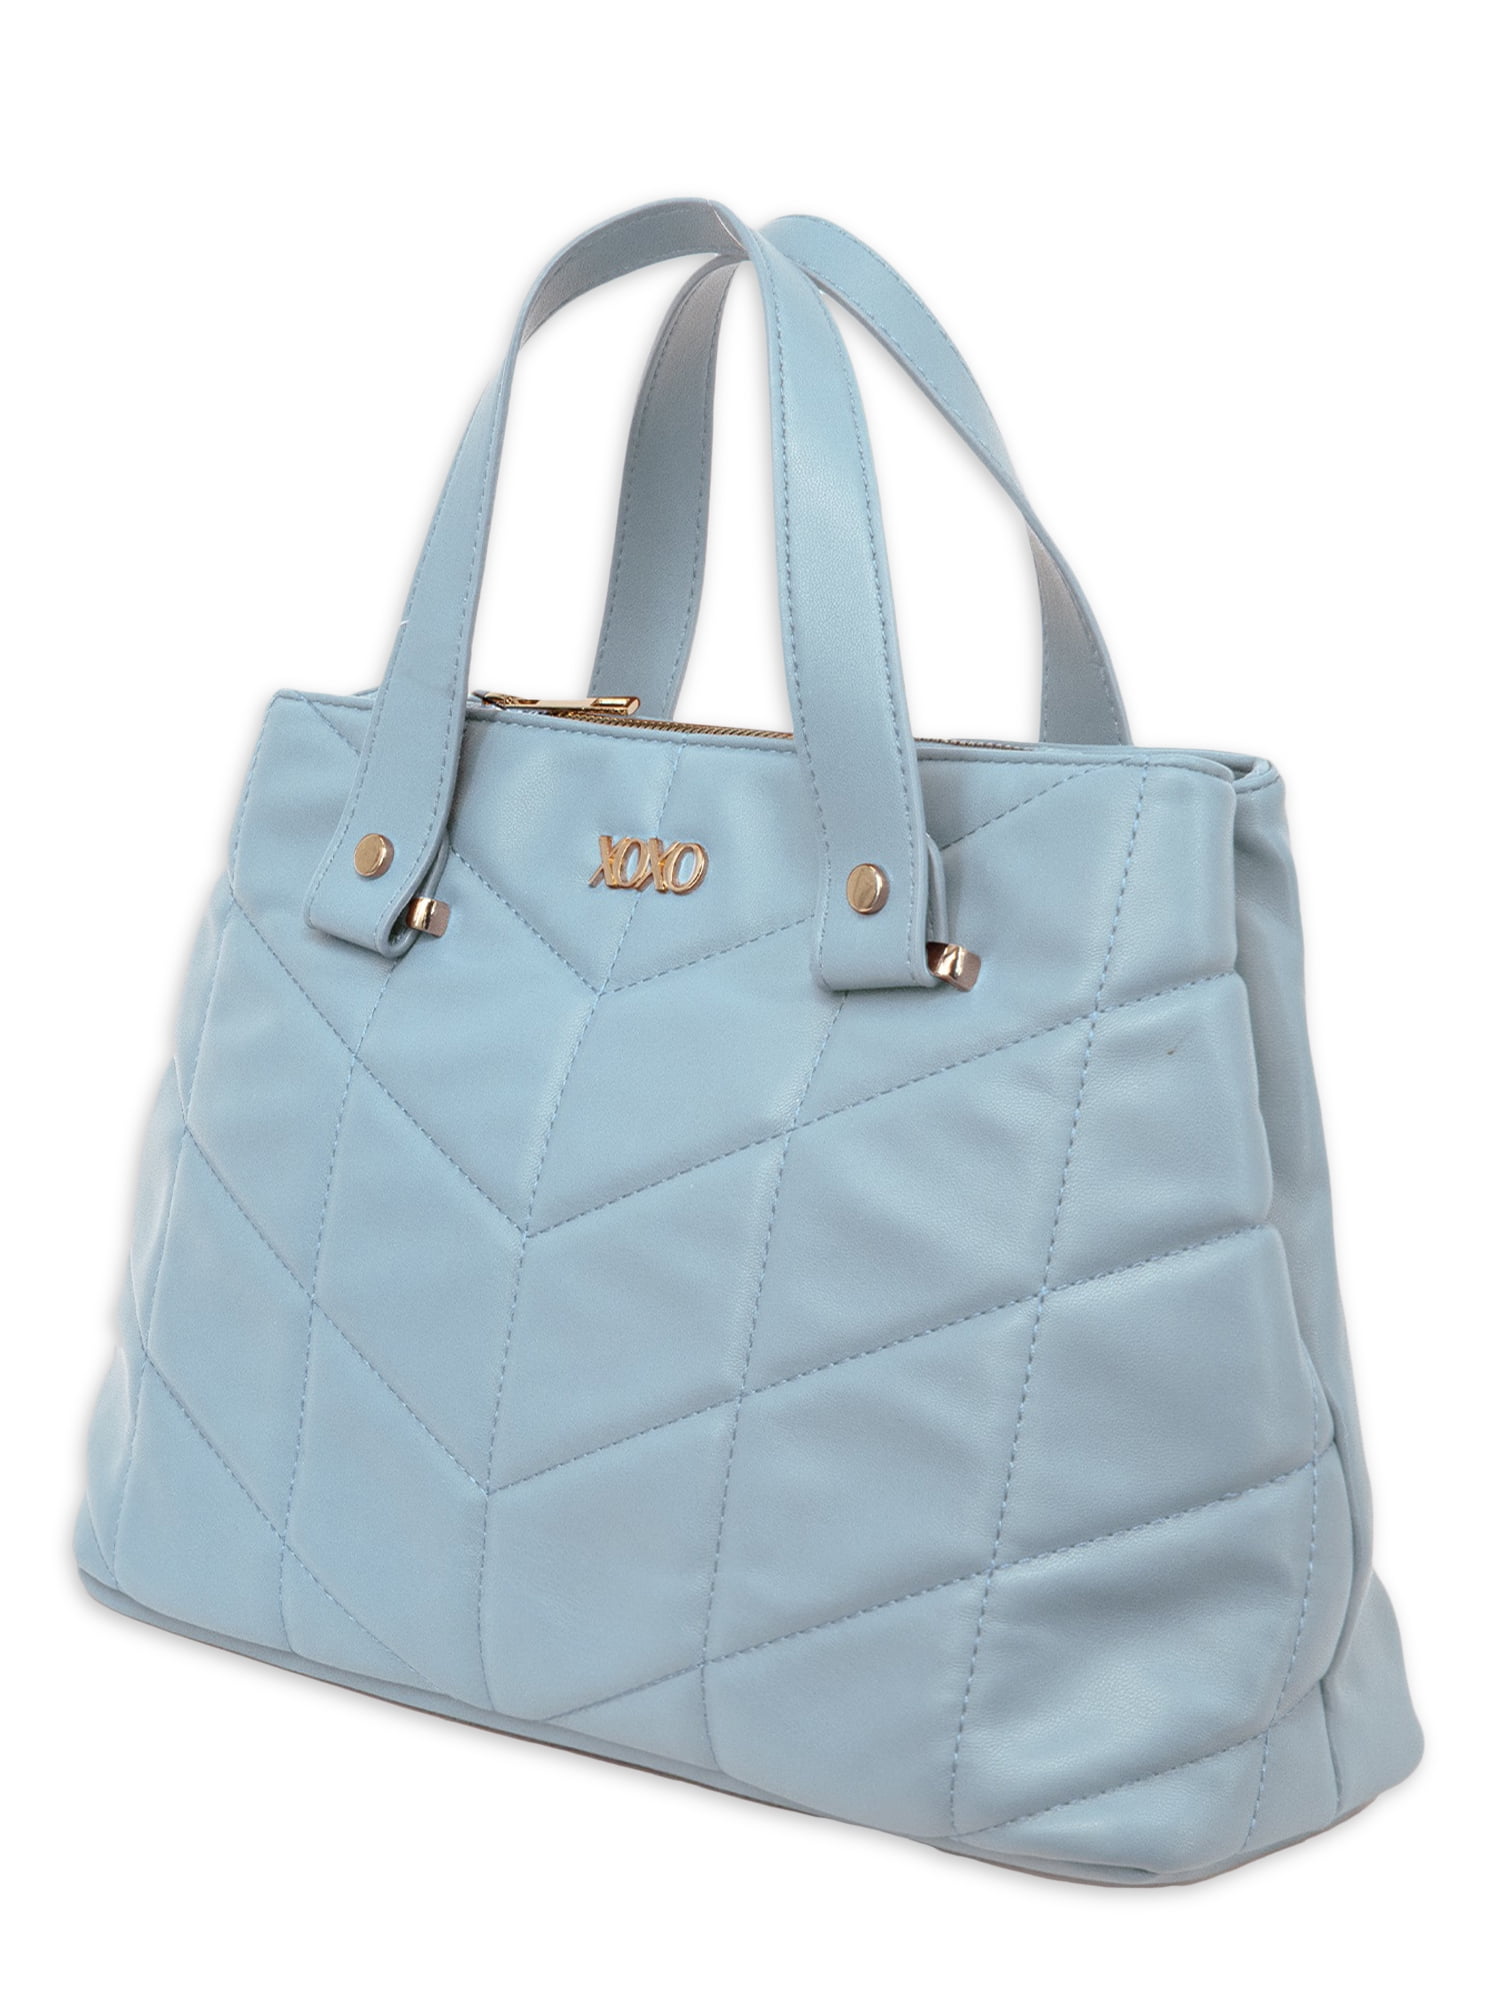 XOXO Women's Blue Vegan Leather Quilted Everyday Tote Bag with Chain Handle  